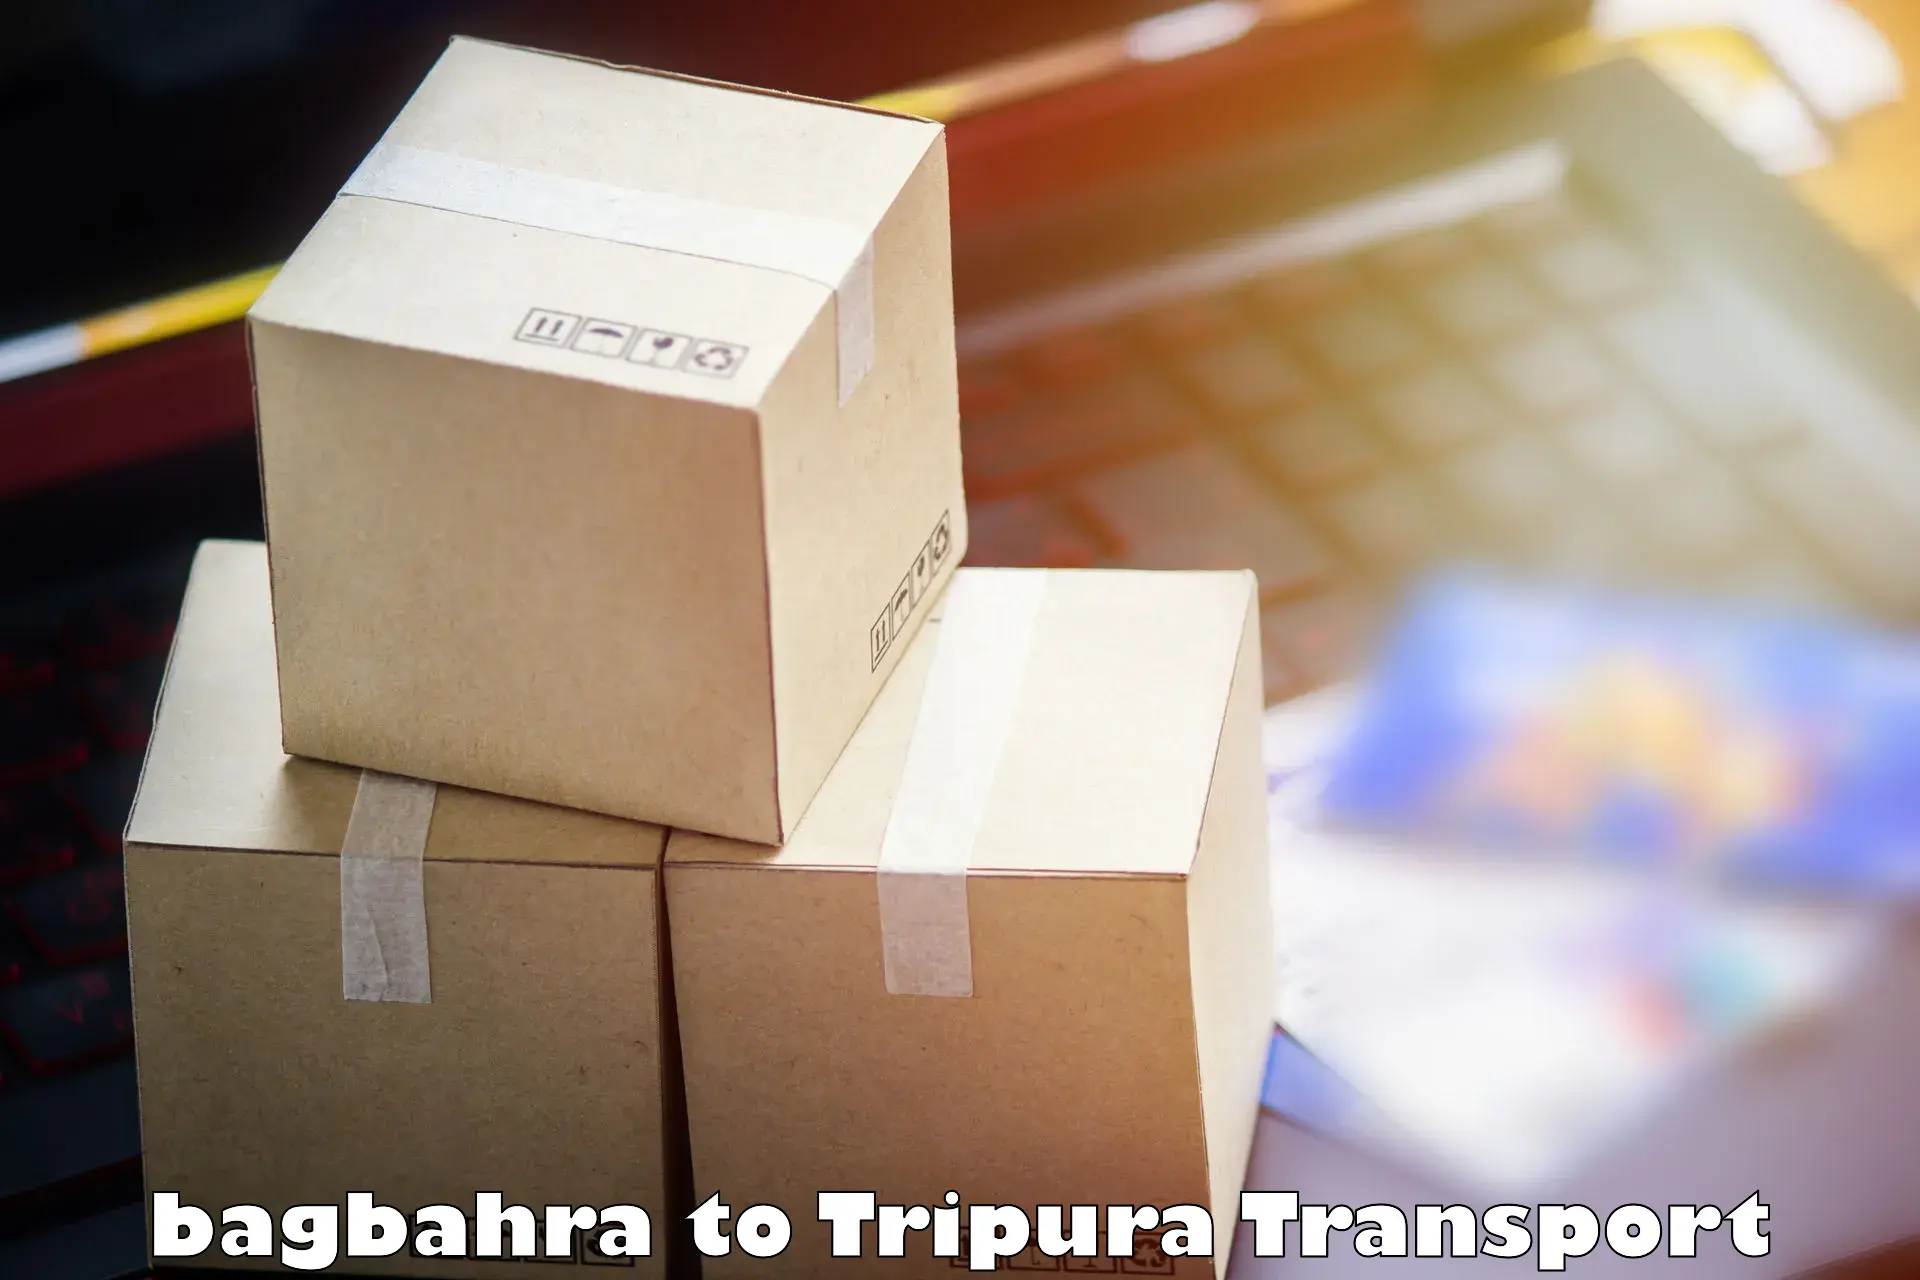 Inland transportation services in bagbahra to Udaipur Tripura